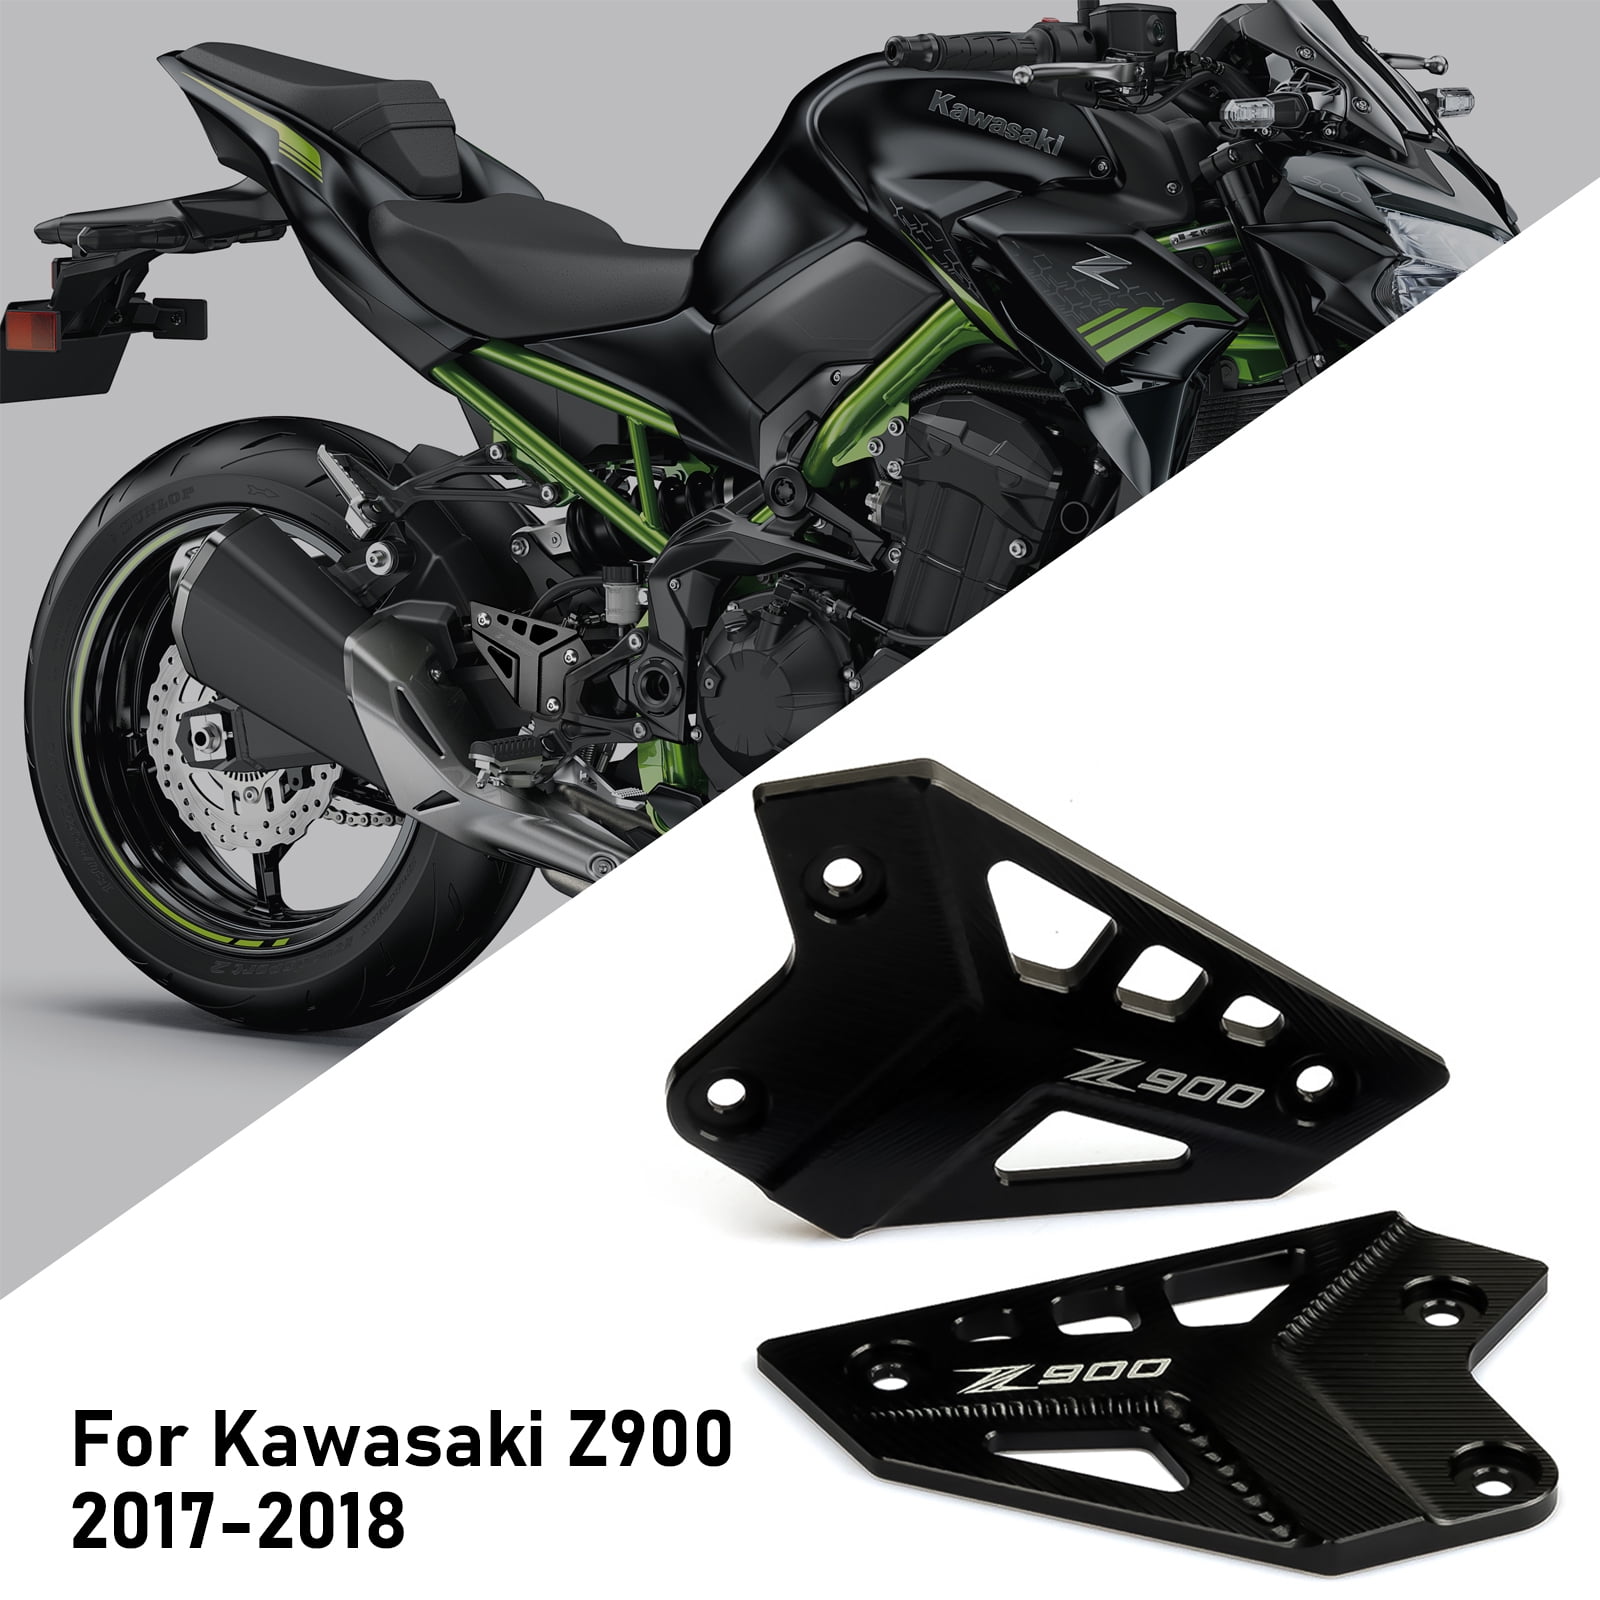 Red Motorcycle Foot Peg Protector Heel Guard for Kawasaki Z900 2017 2018 2019 Aluminum Alloy Footrest Plate